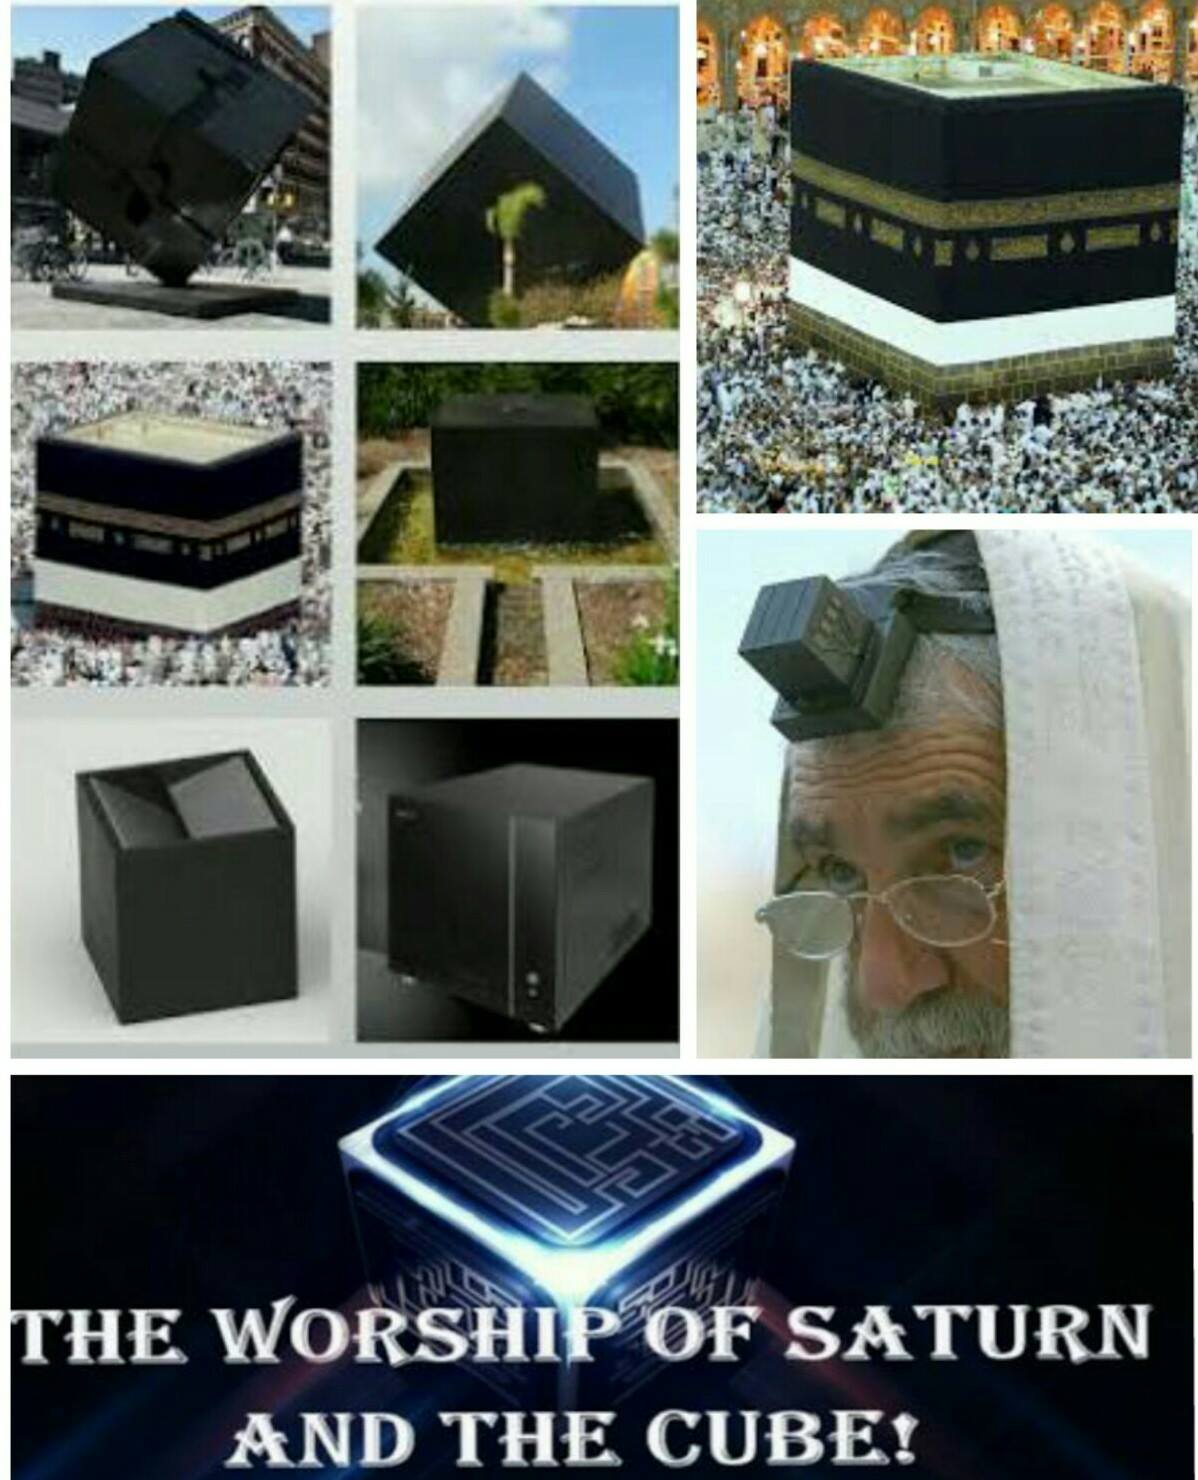 The Worship of Saturn and the Cube!